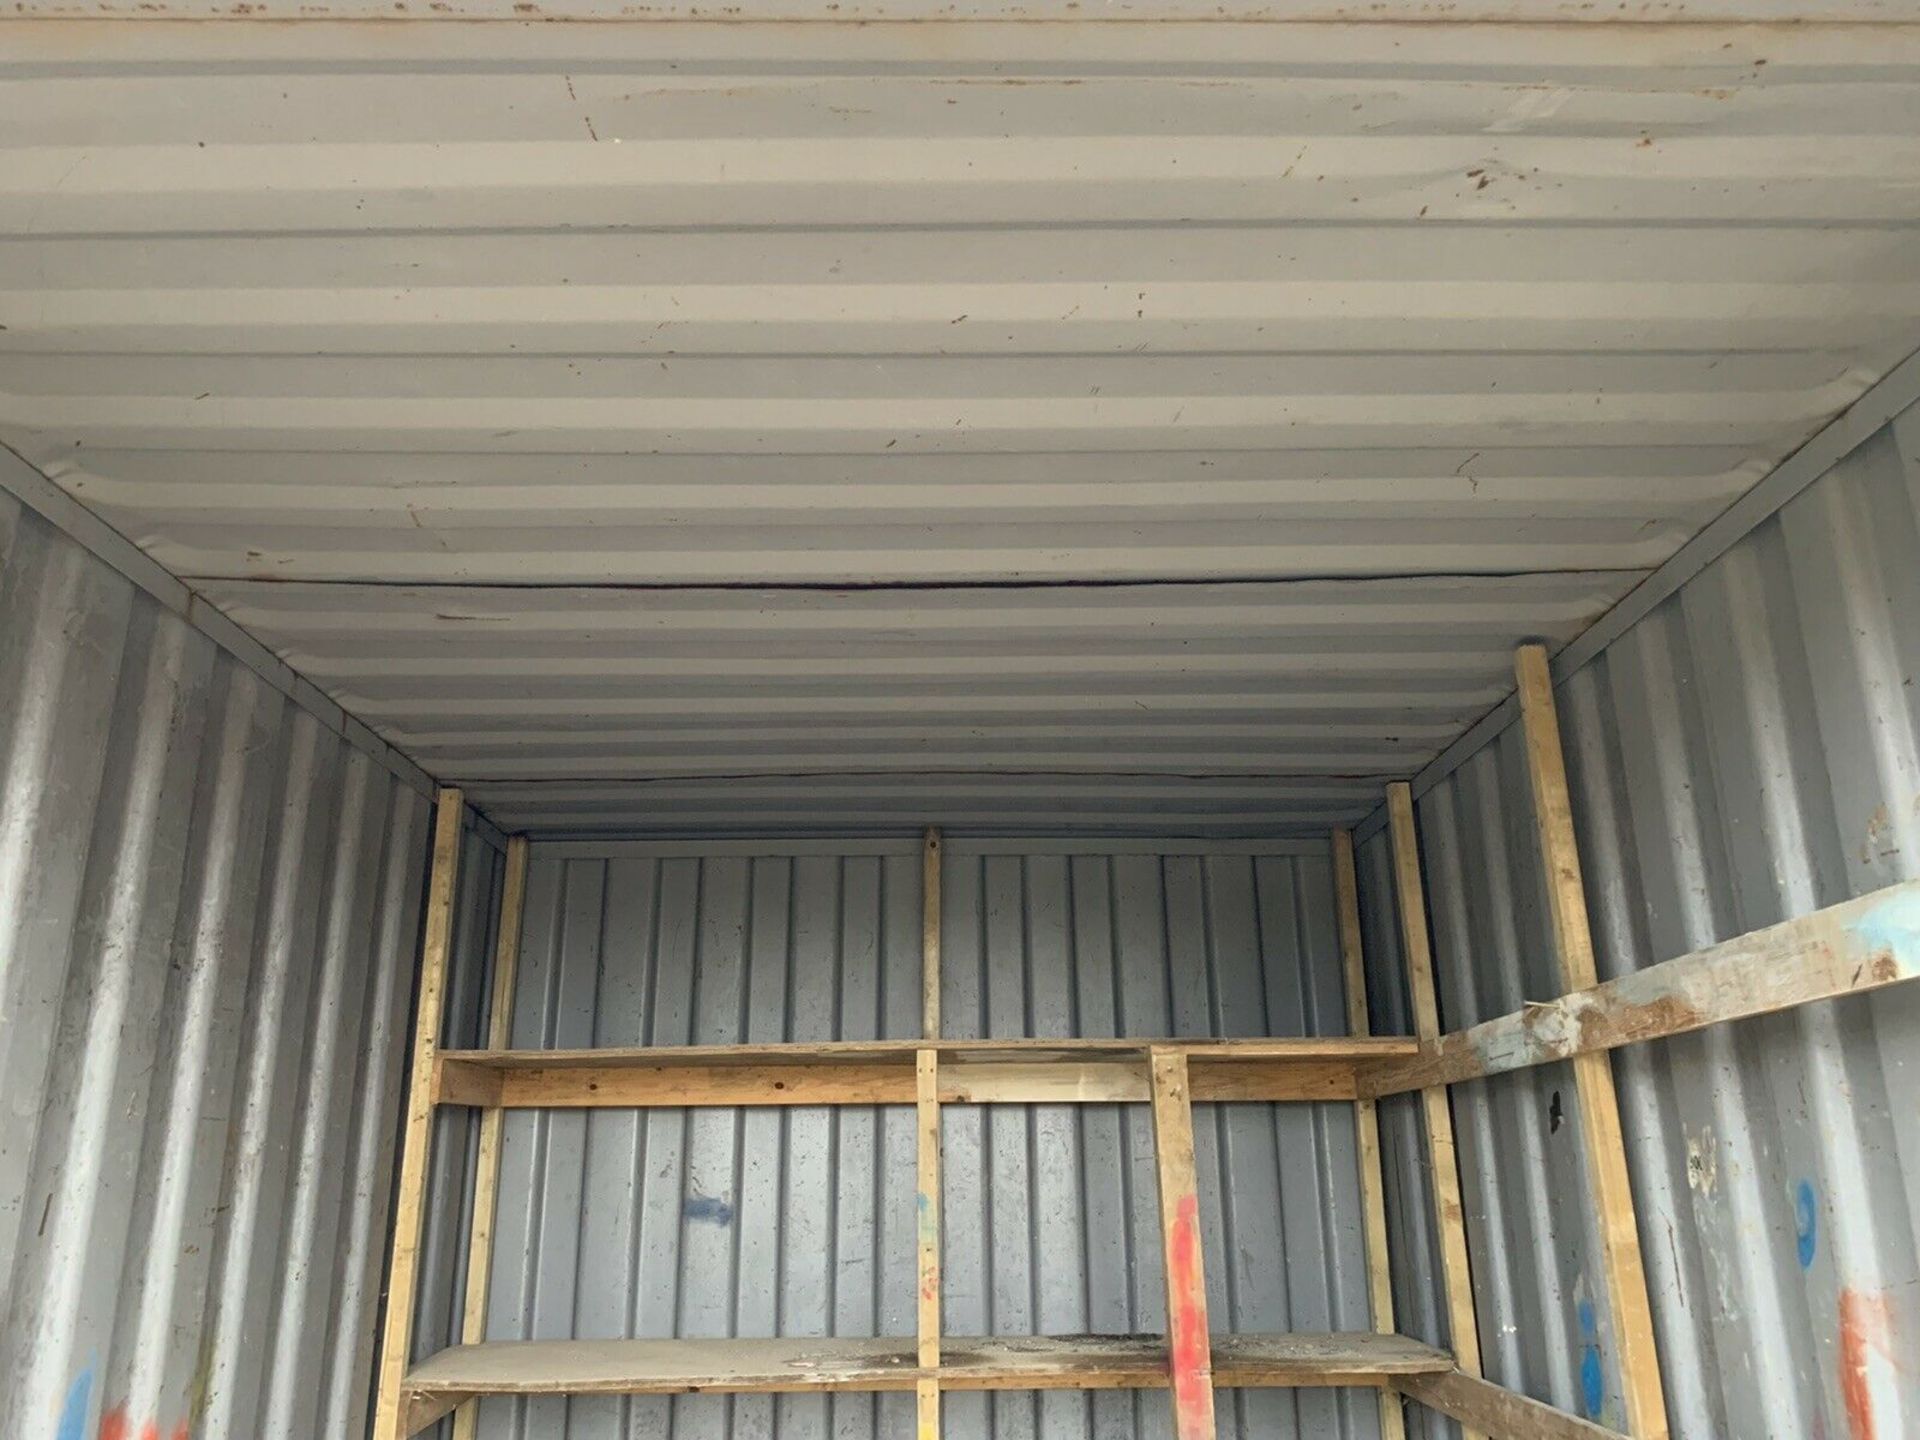 Office / Storage Container Anti Vandal Steel Portable Building 20ft x 8ft - Image 7 of 11